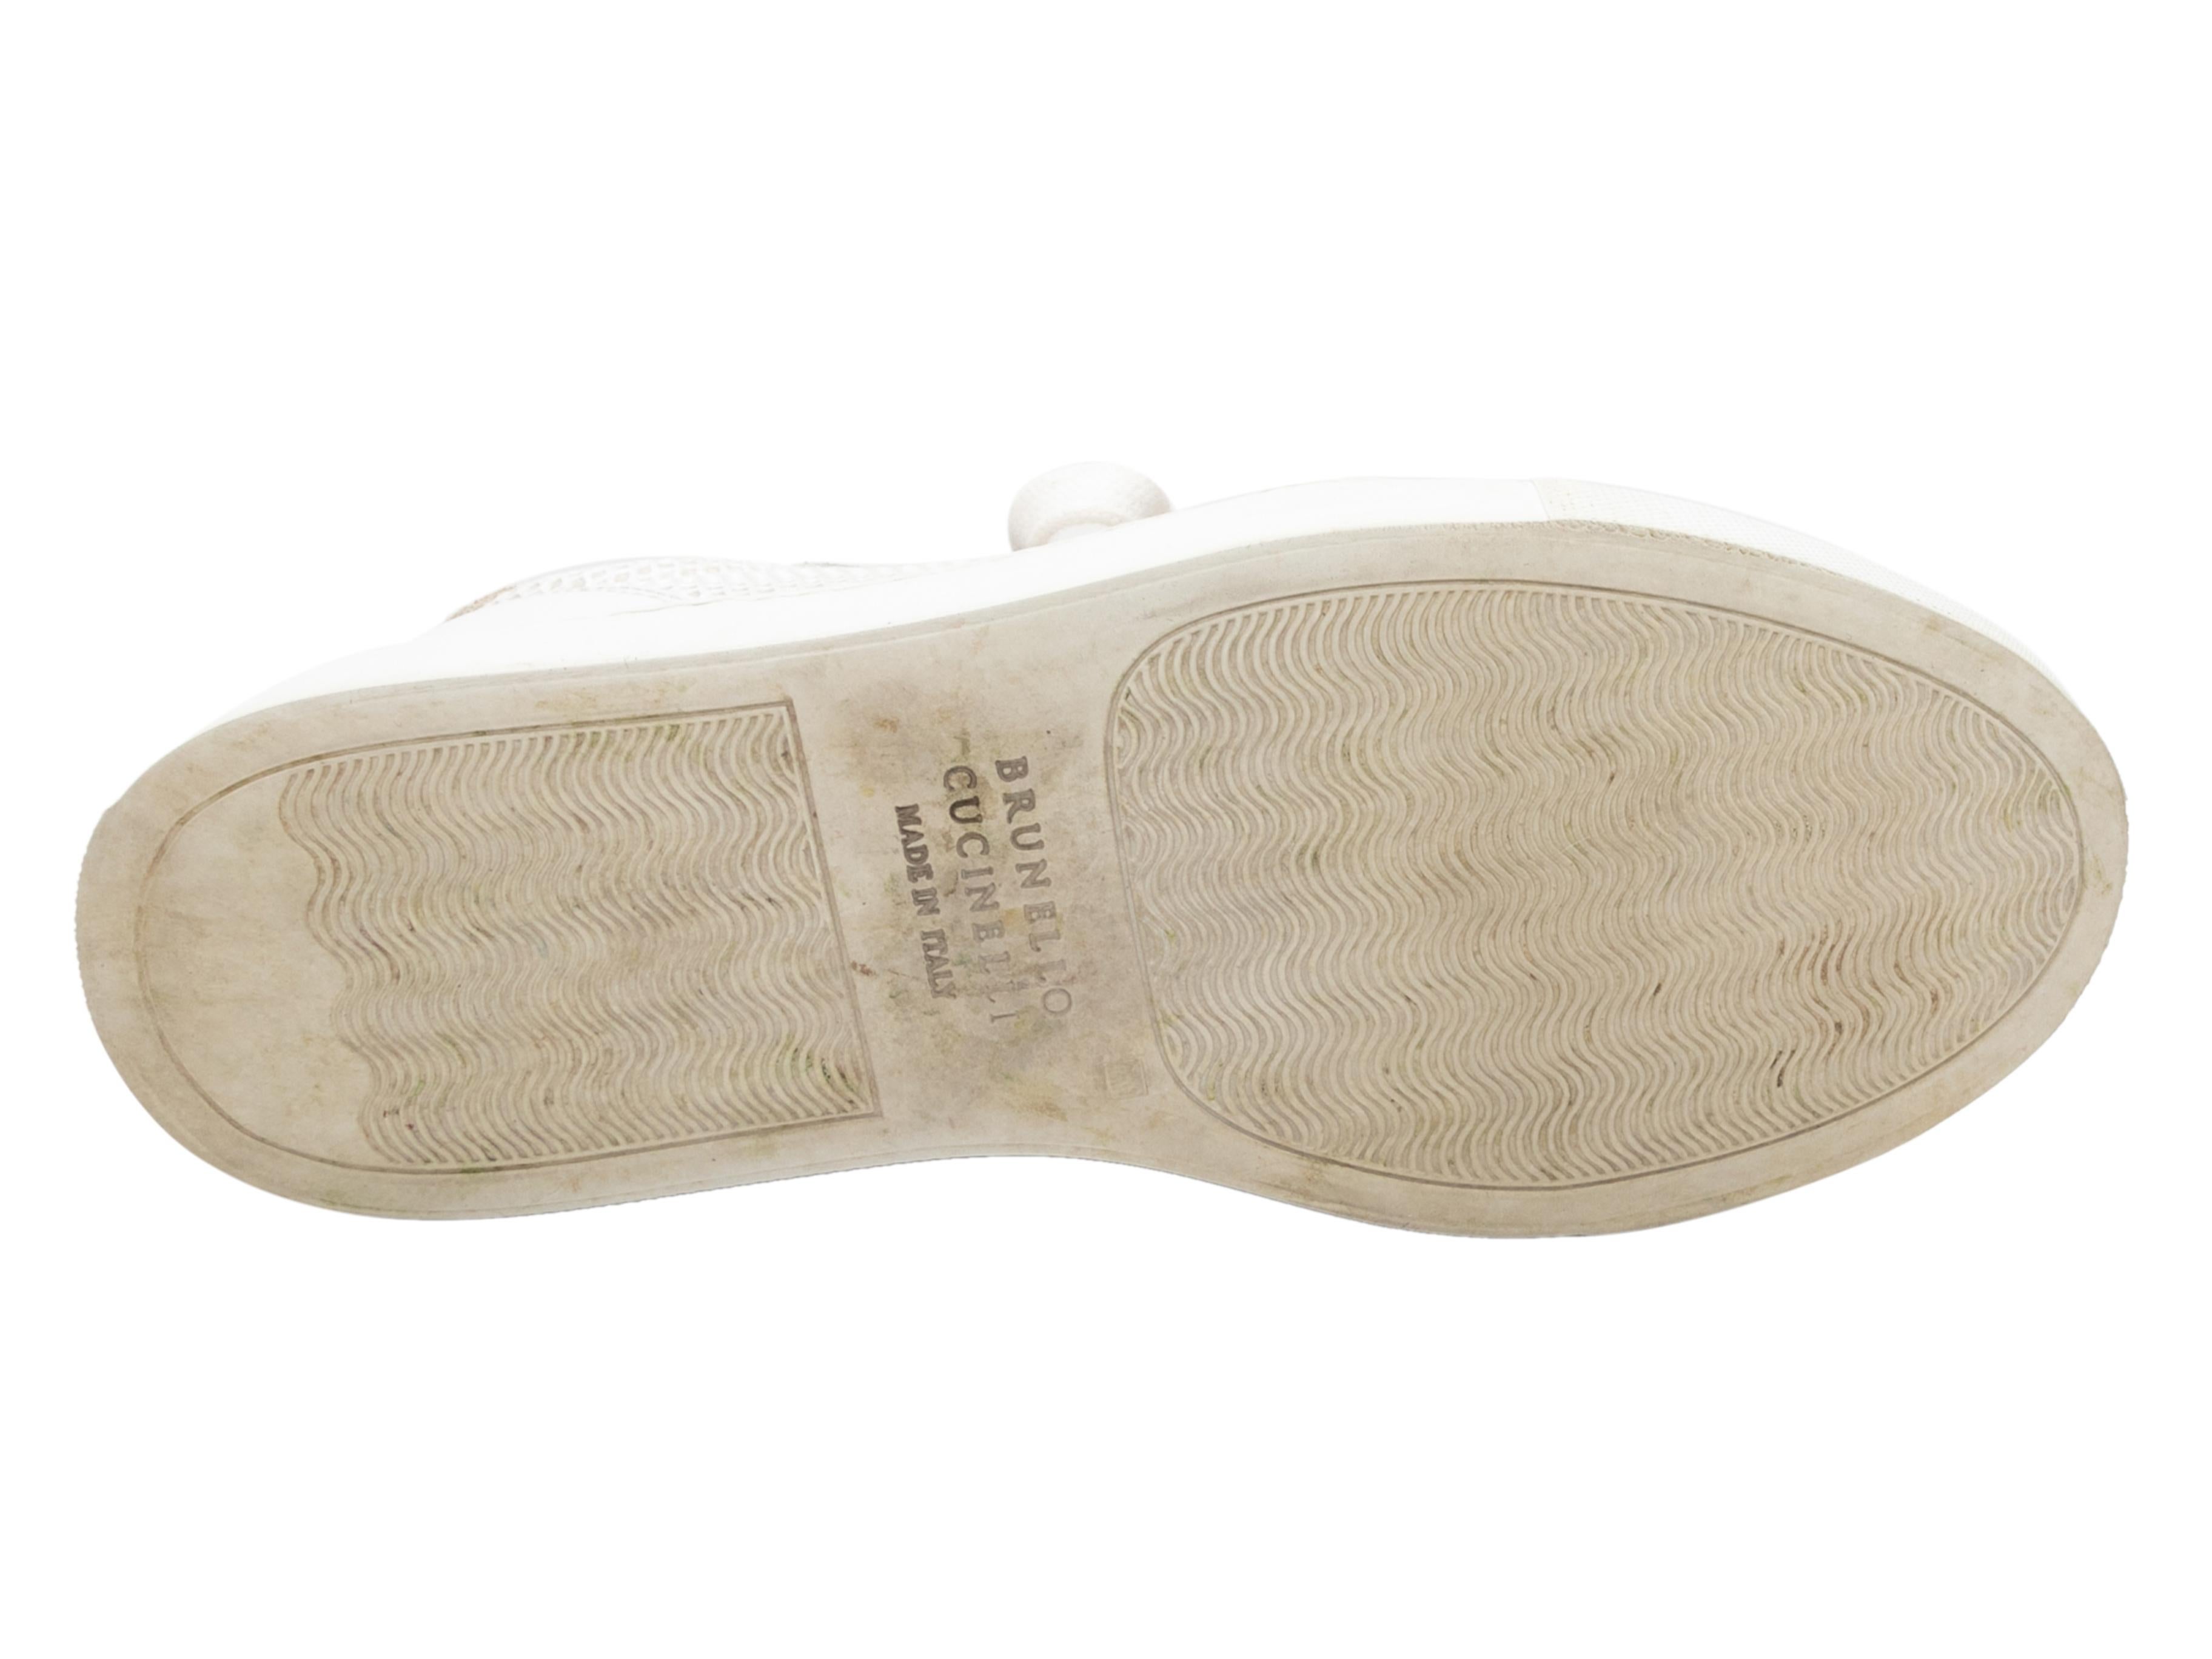 White and beige leather and suede low-top sneakers by Brunello Cucinelli. Silver-tone Monilli trim at tops. Rubber soles. Lace-up tie closures at tops. 1